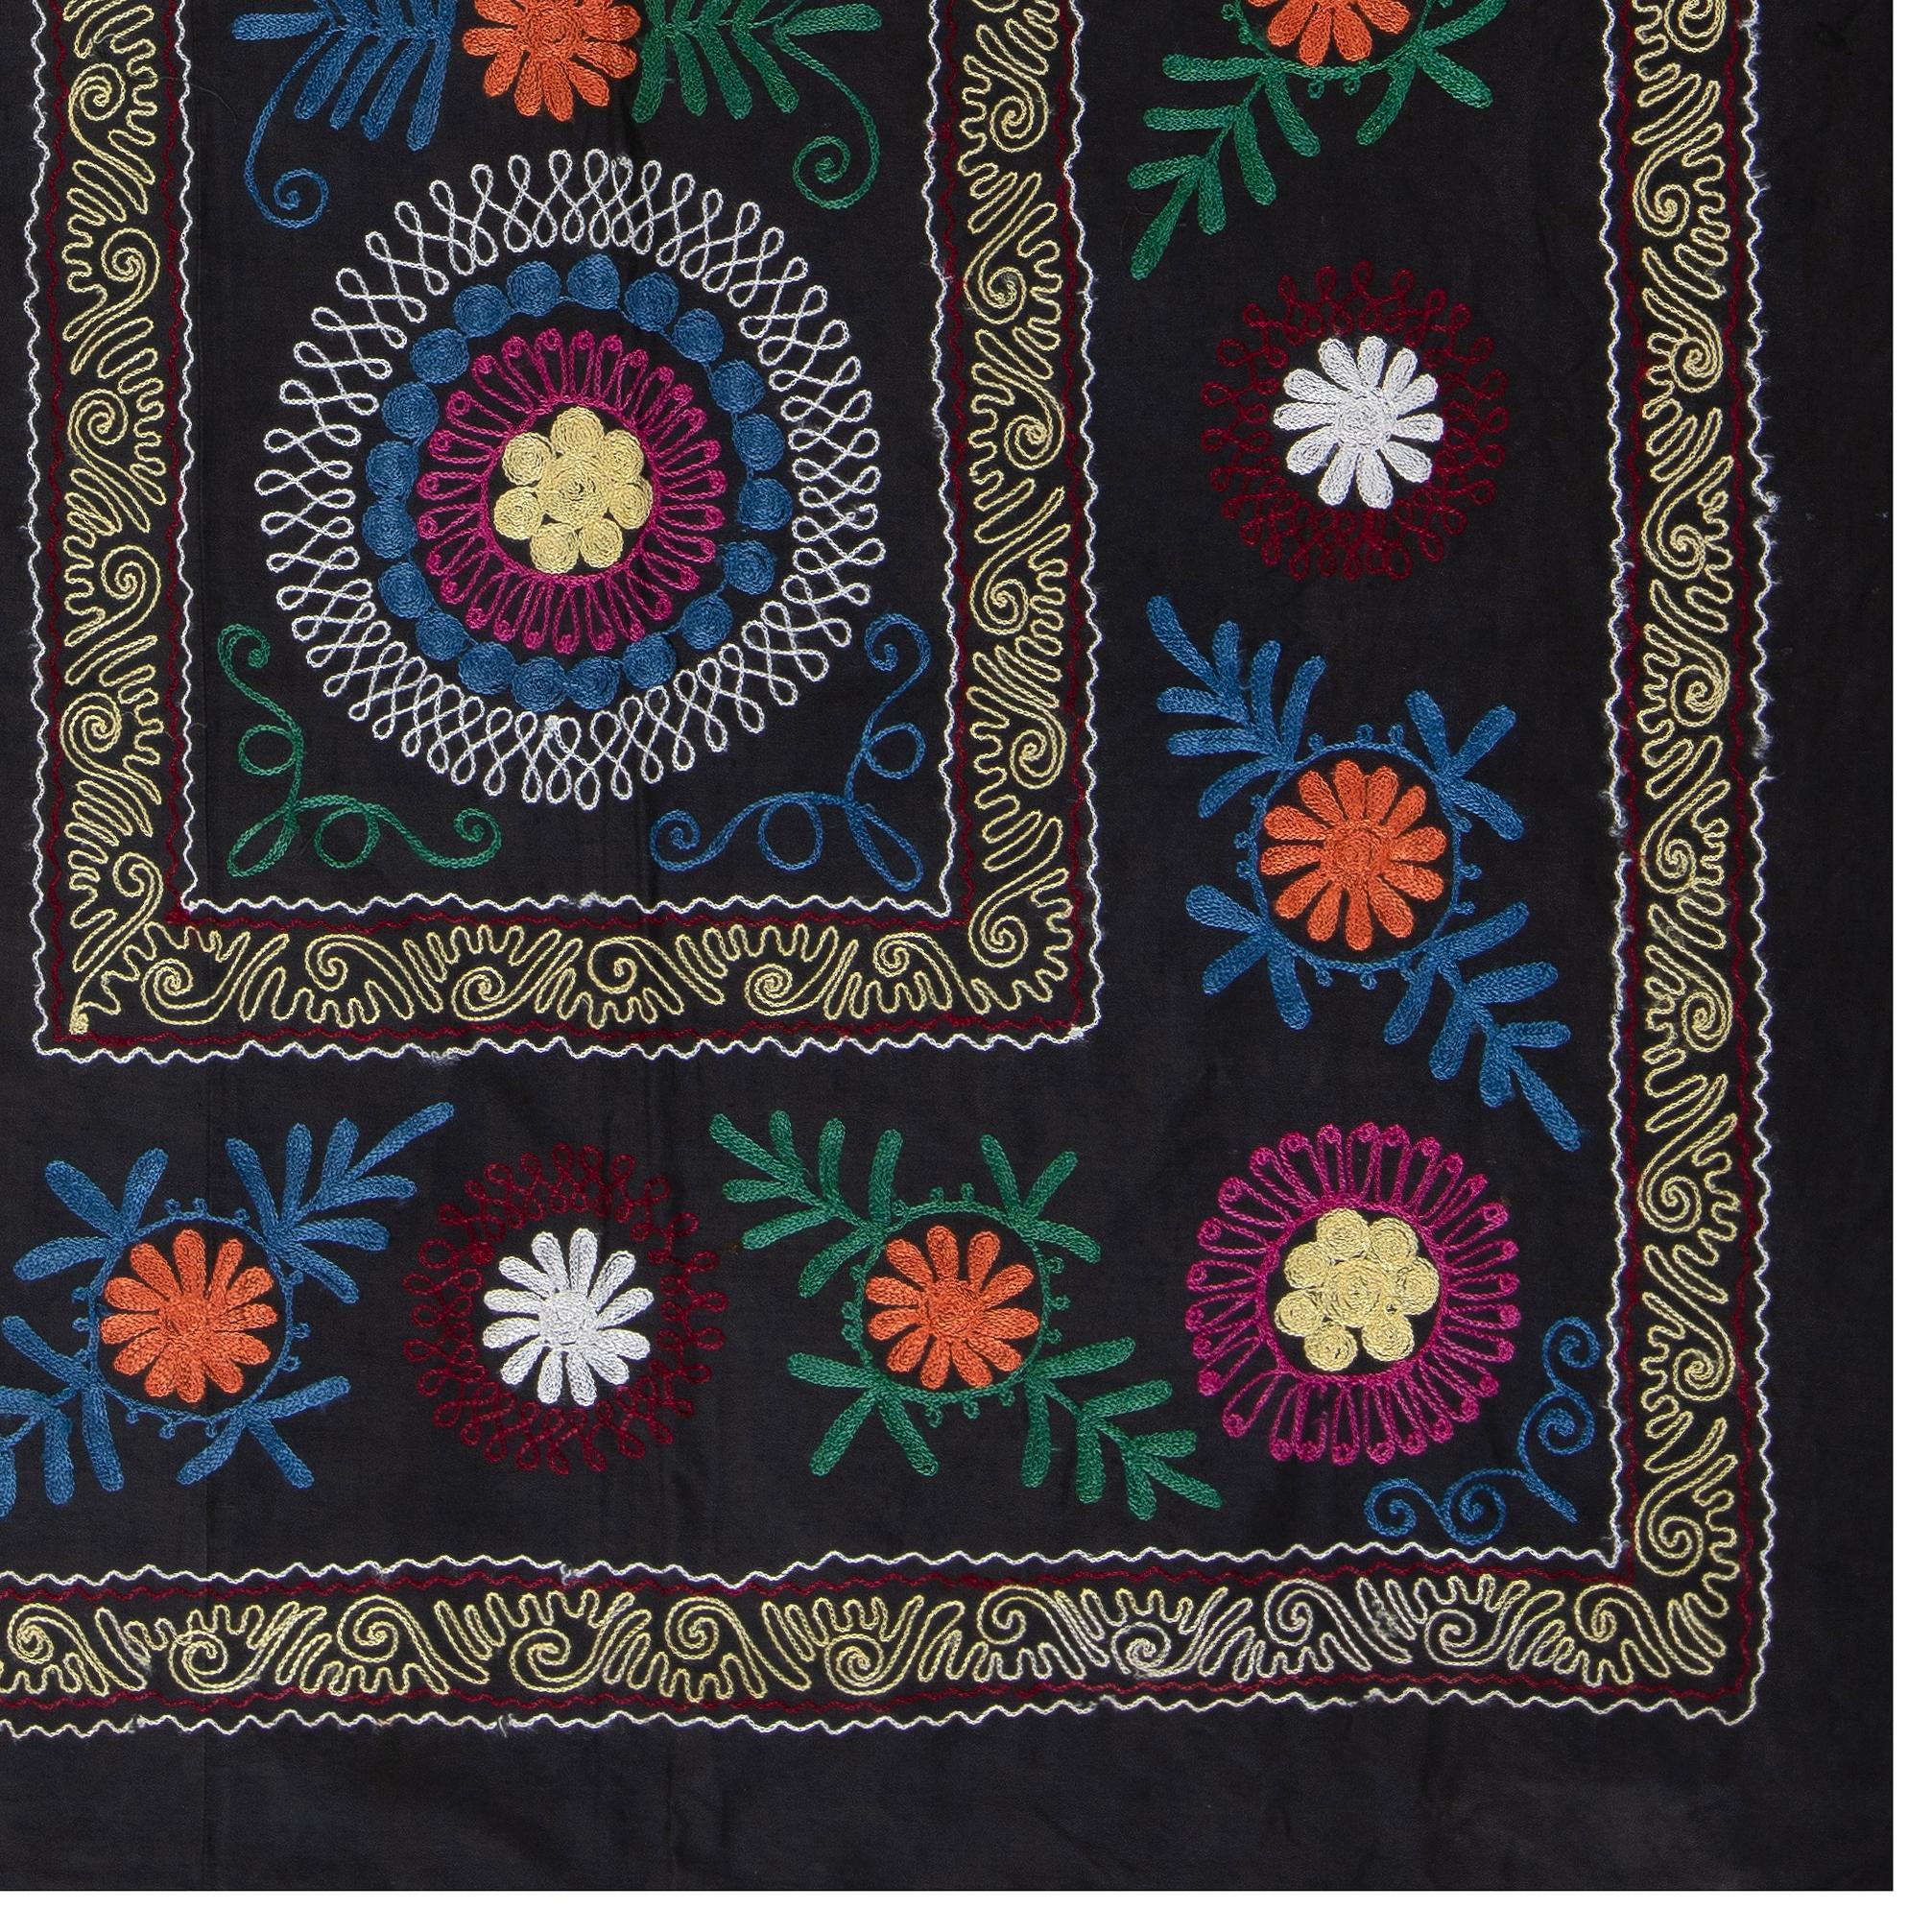 3.7x6.3 Ft Uzbek Suzani Wall Hanging in Black, Vintage Silk Embroidery Bedspread In Good Condition For Sale In Philadelphia, PA